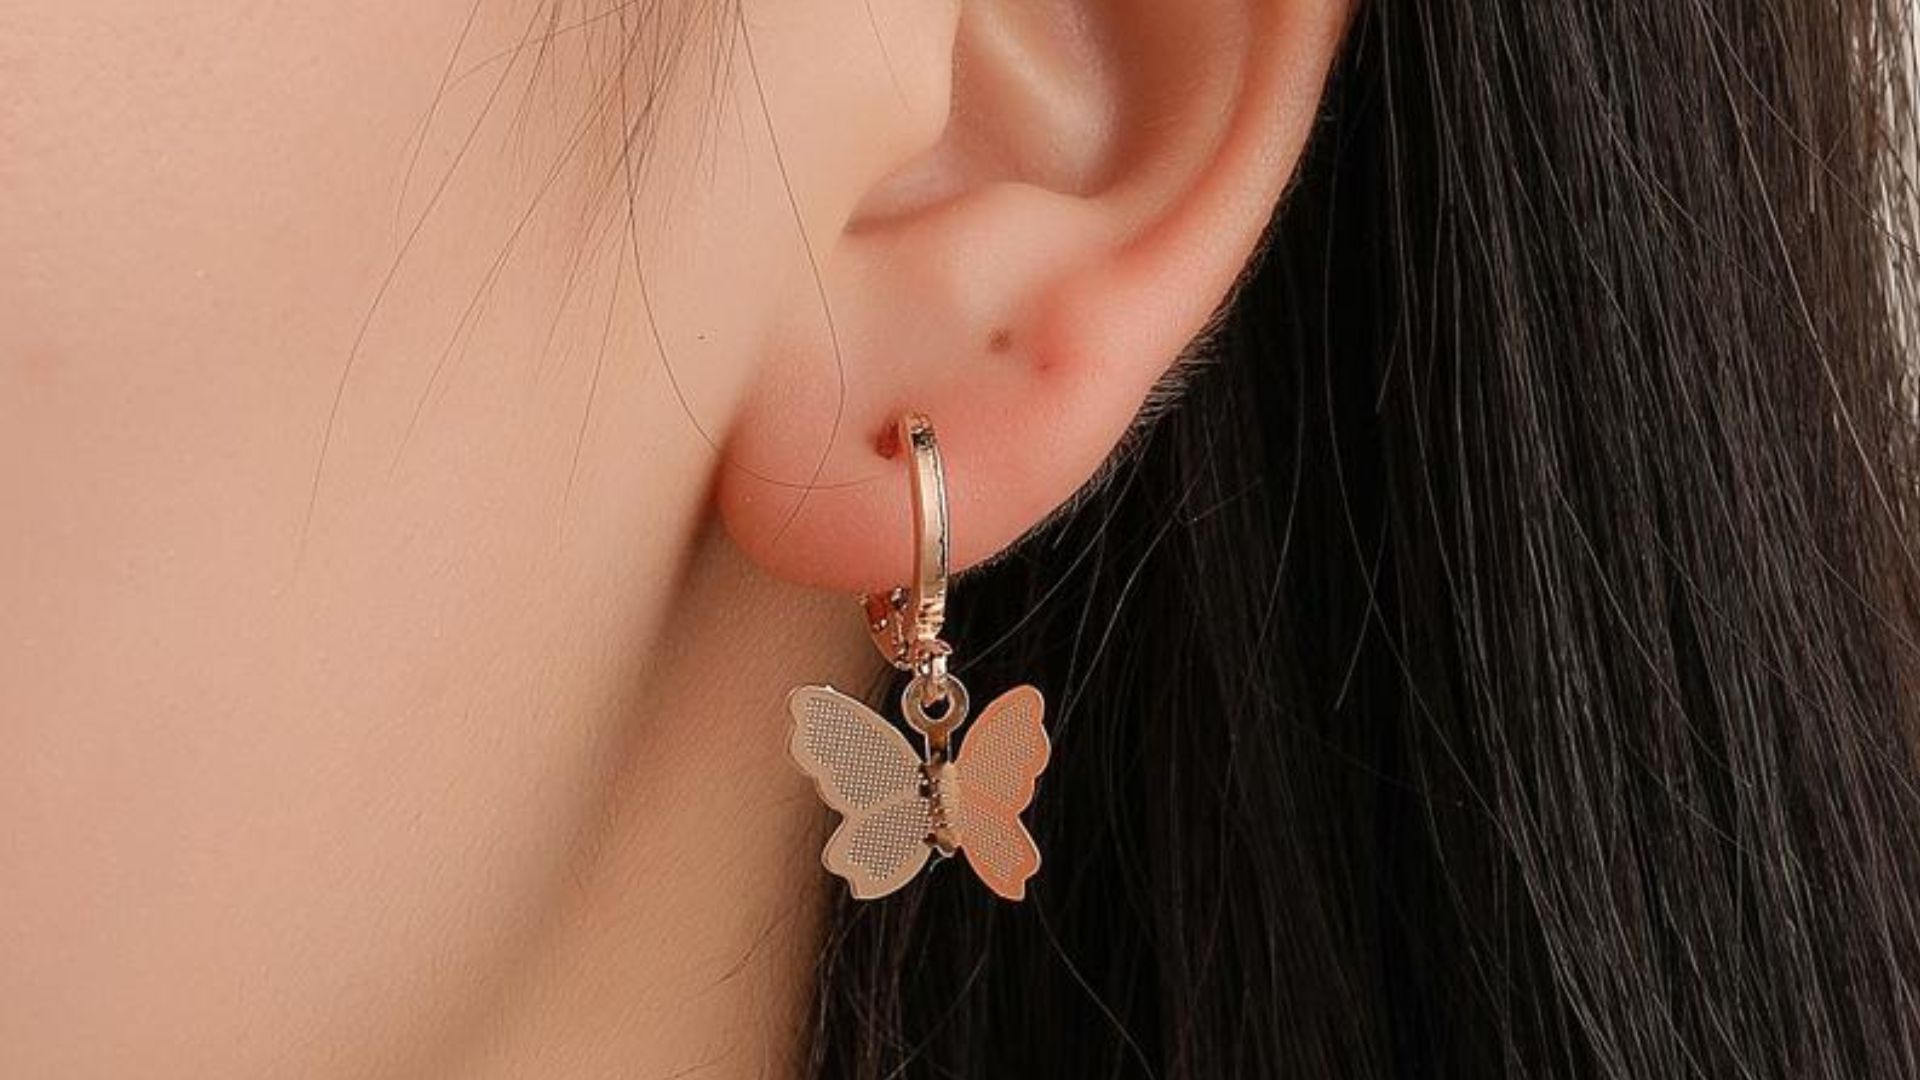 Butterfly Earrings - Embracing Elegance And Transformation